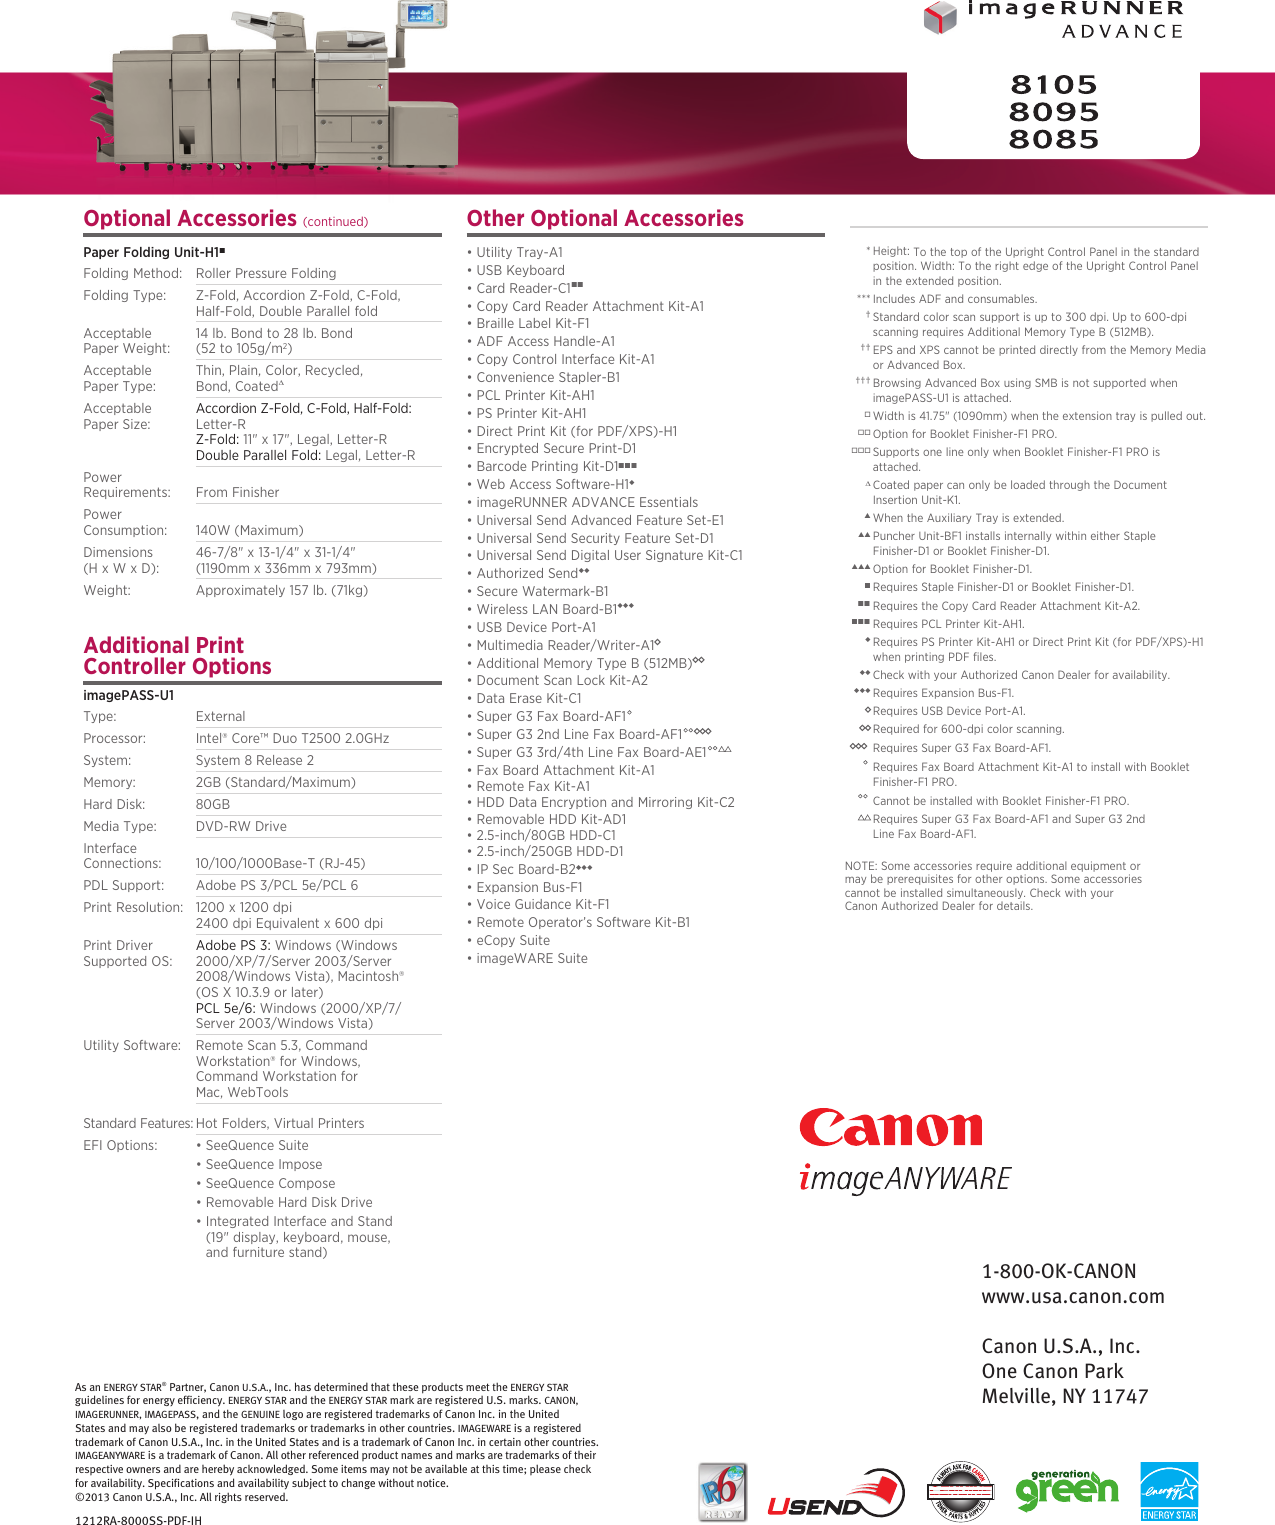 Page 5 of 5 - Canon Canon-Imagerunner-Advance-8085-Specification-Sheet-  Canon-imagerunner-advance-8085-specification-sheet